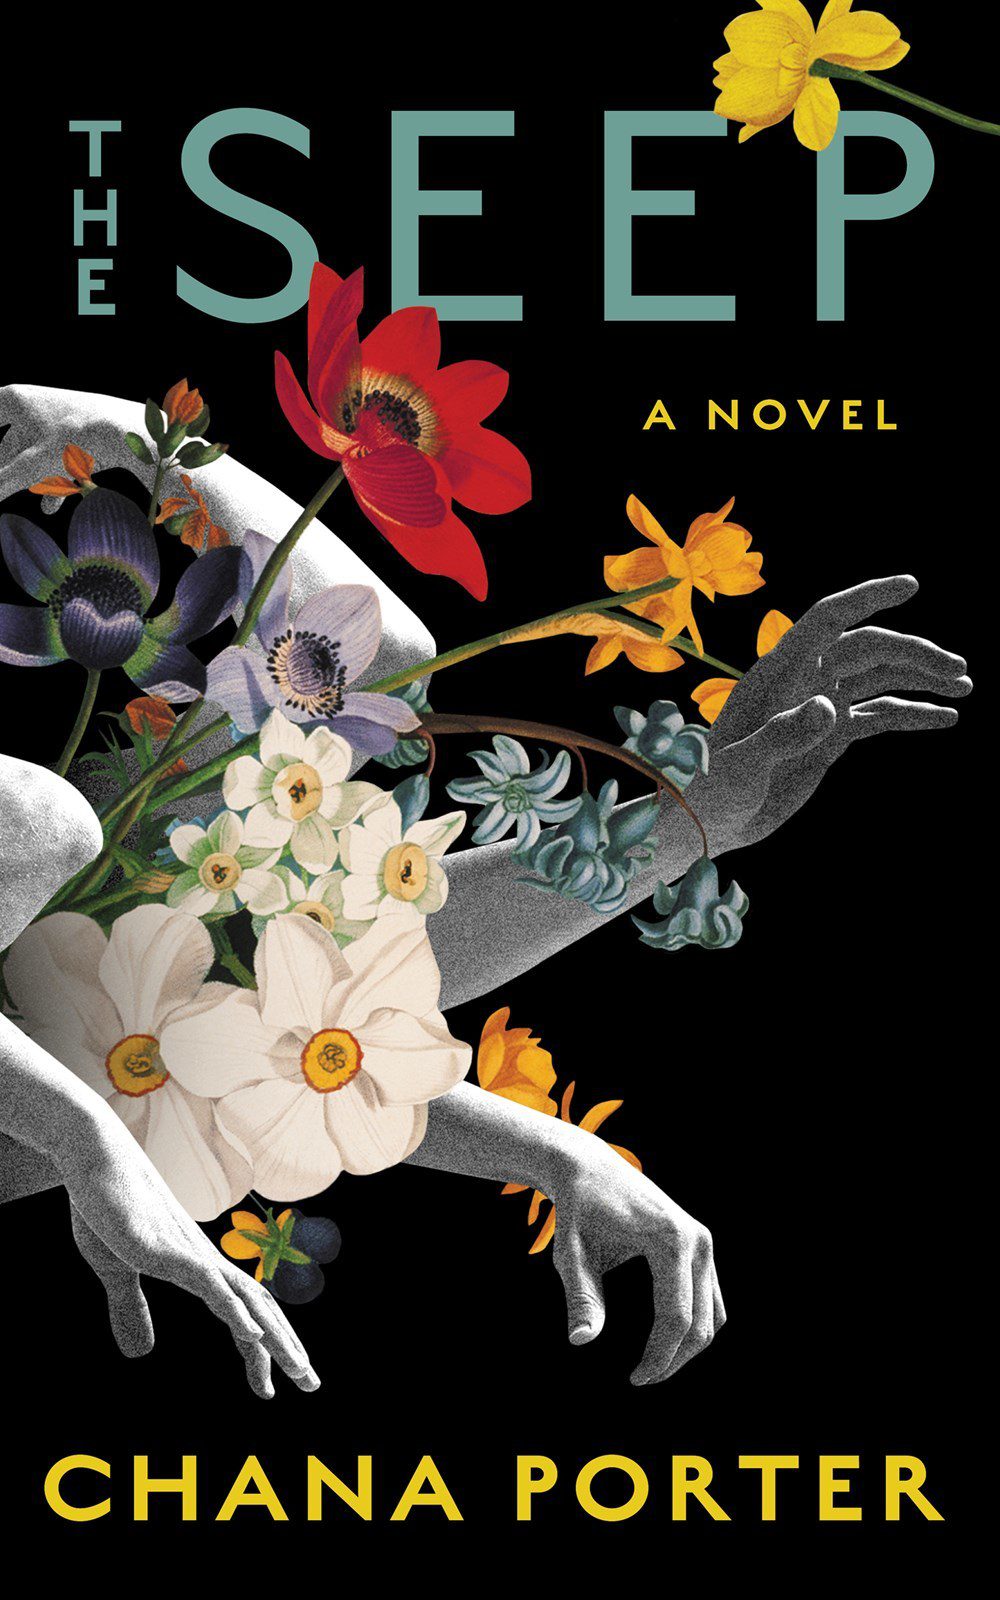 Cover for The Seep by Chana Porter, it shows a cluster of flowers with white arms reaching out from beneath the stems.